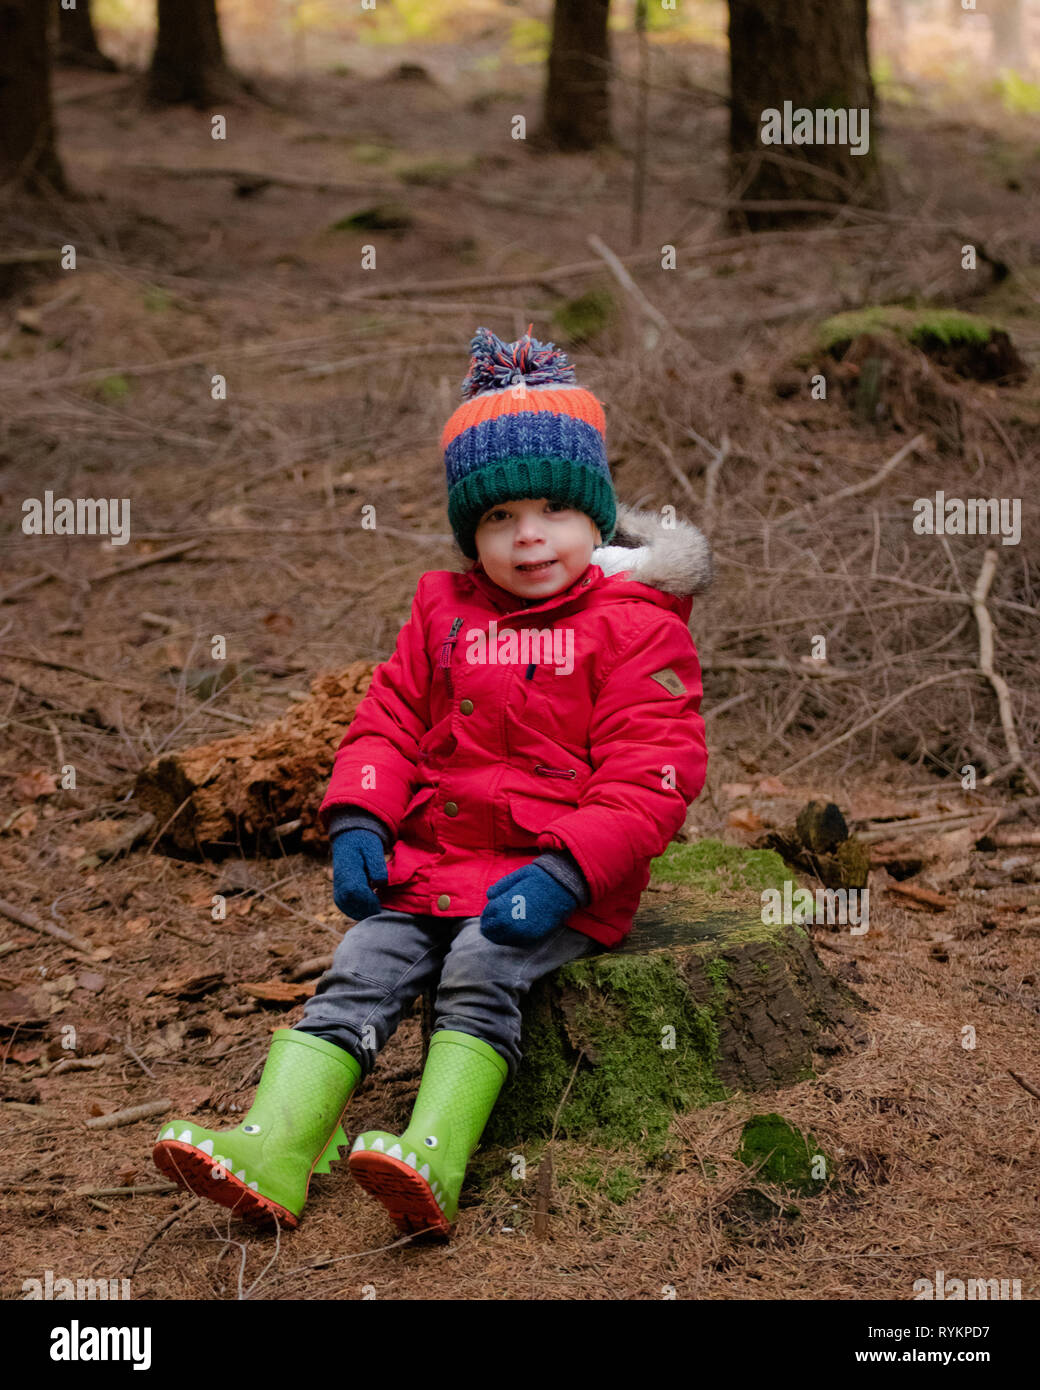 Two year old toddler sat on tree stump in the forest during autumn wearing a red coat, wellies and a bobble hat Stock Photo